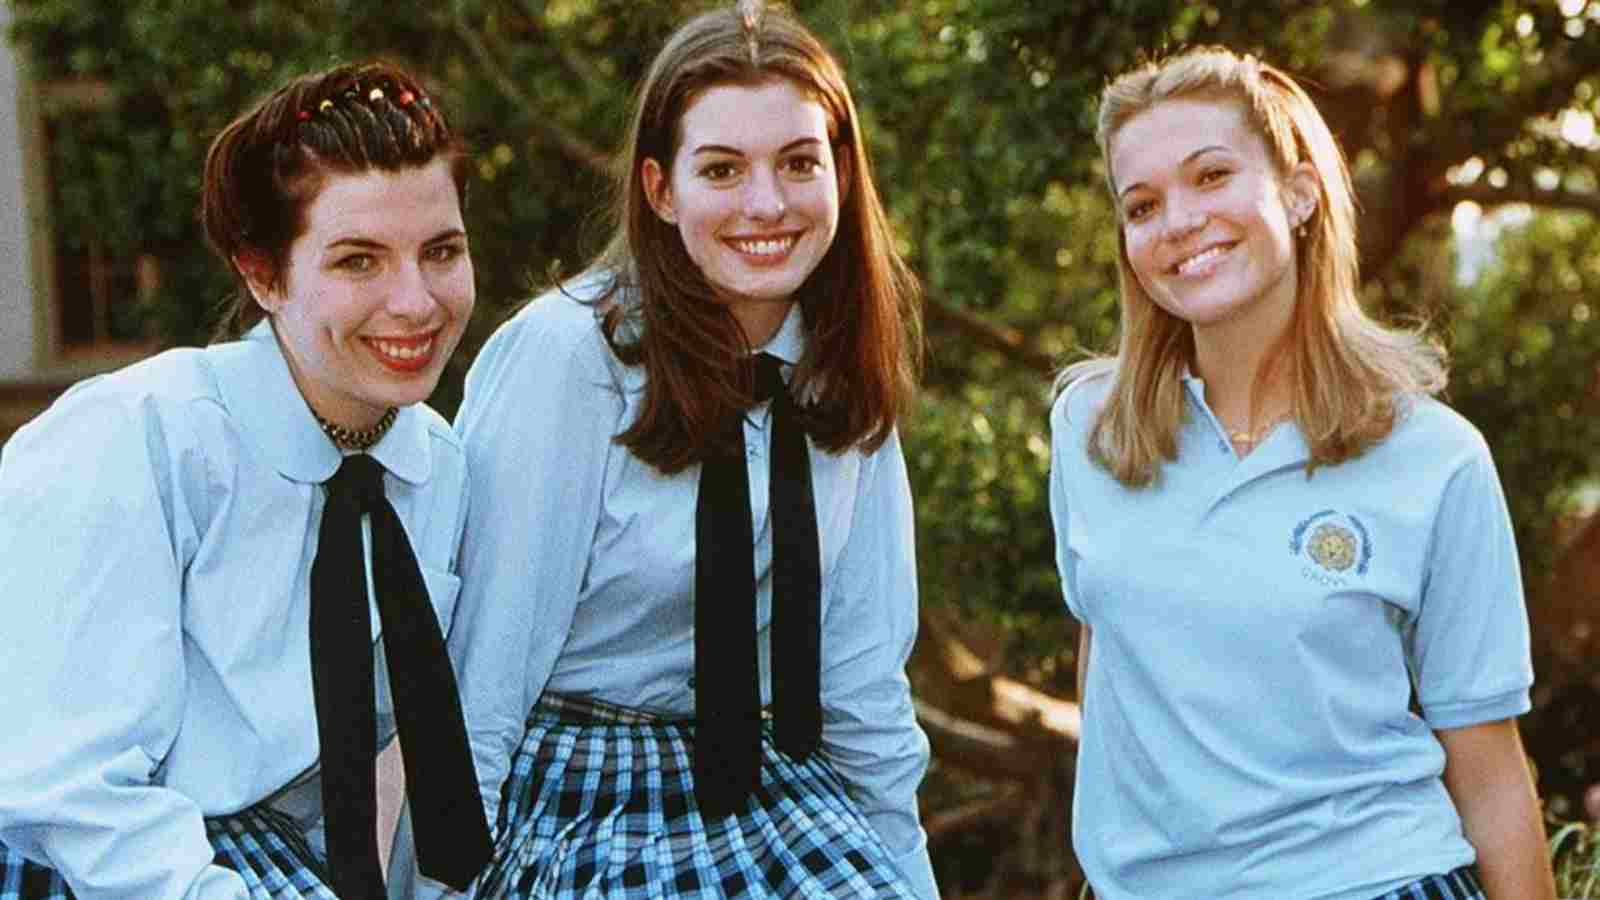 Mandy Moore wants Lana and Mia to be friends in 'Princess Diaries 3'